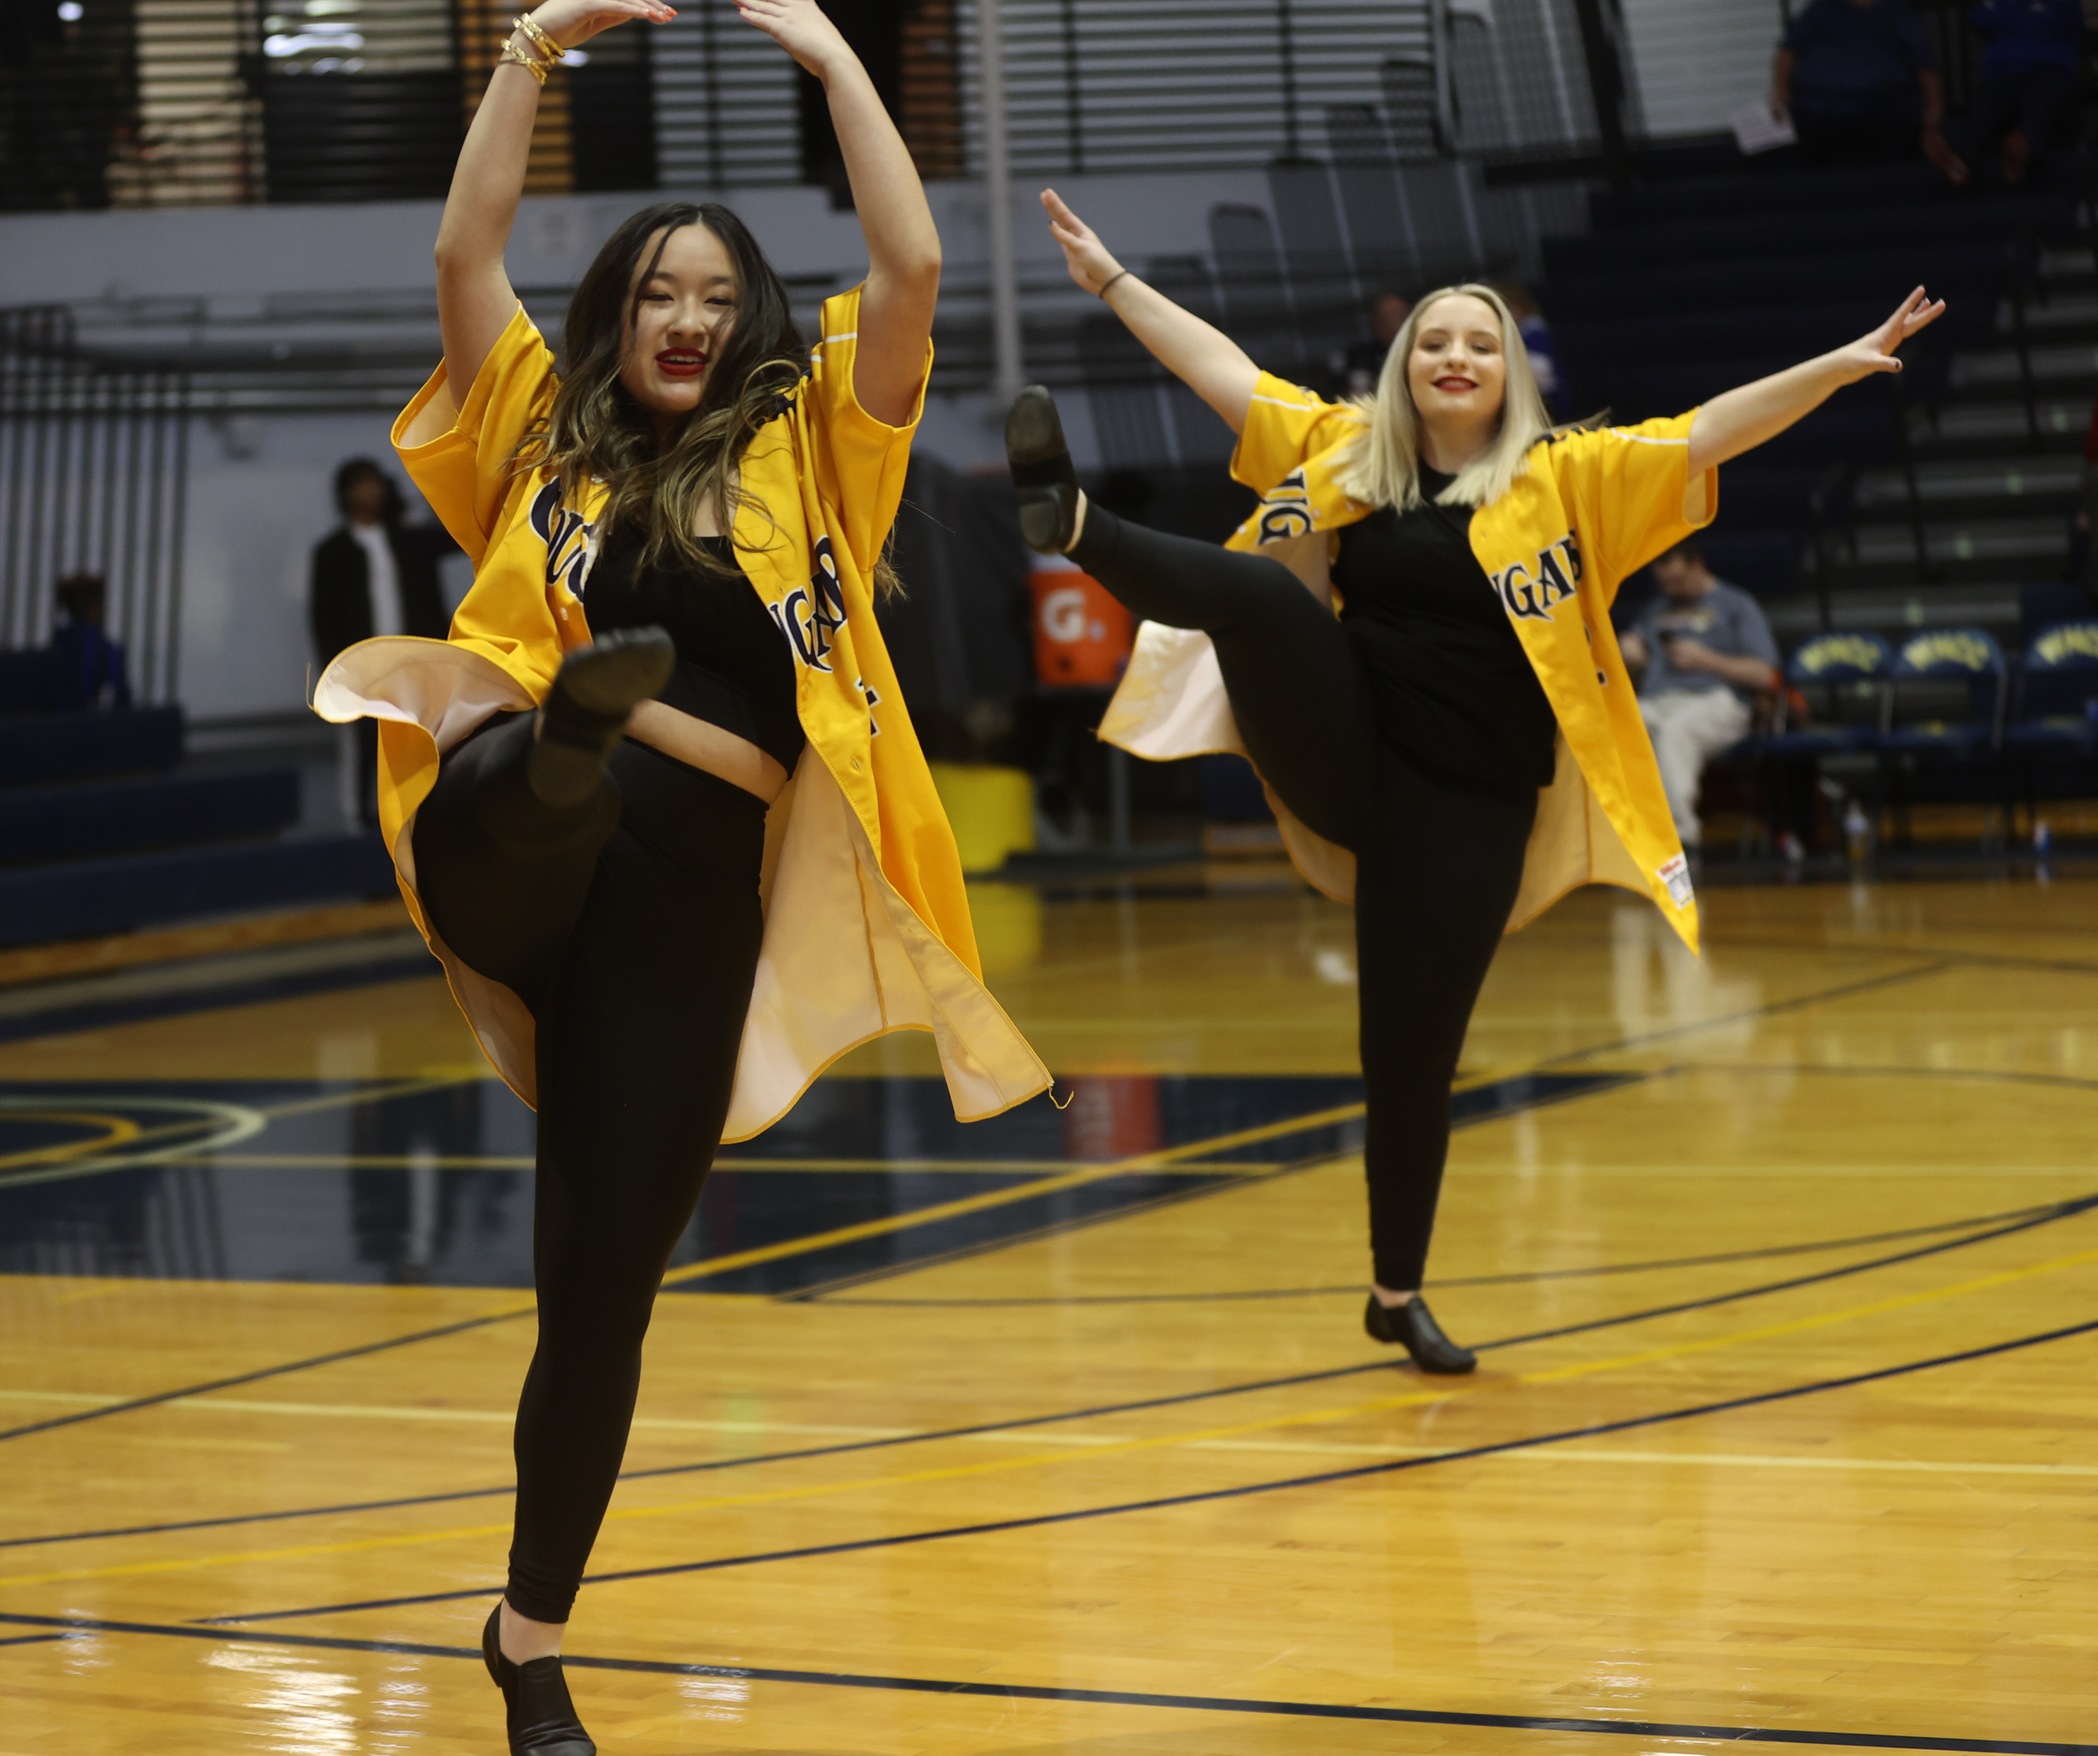 Dance team performs at Cougar basketball games